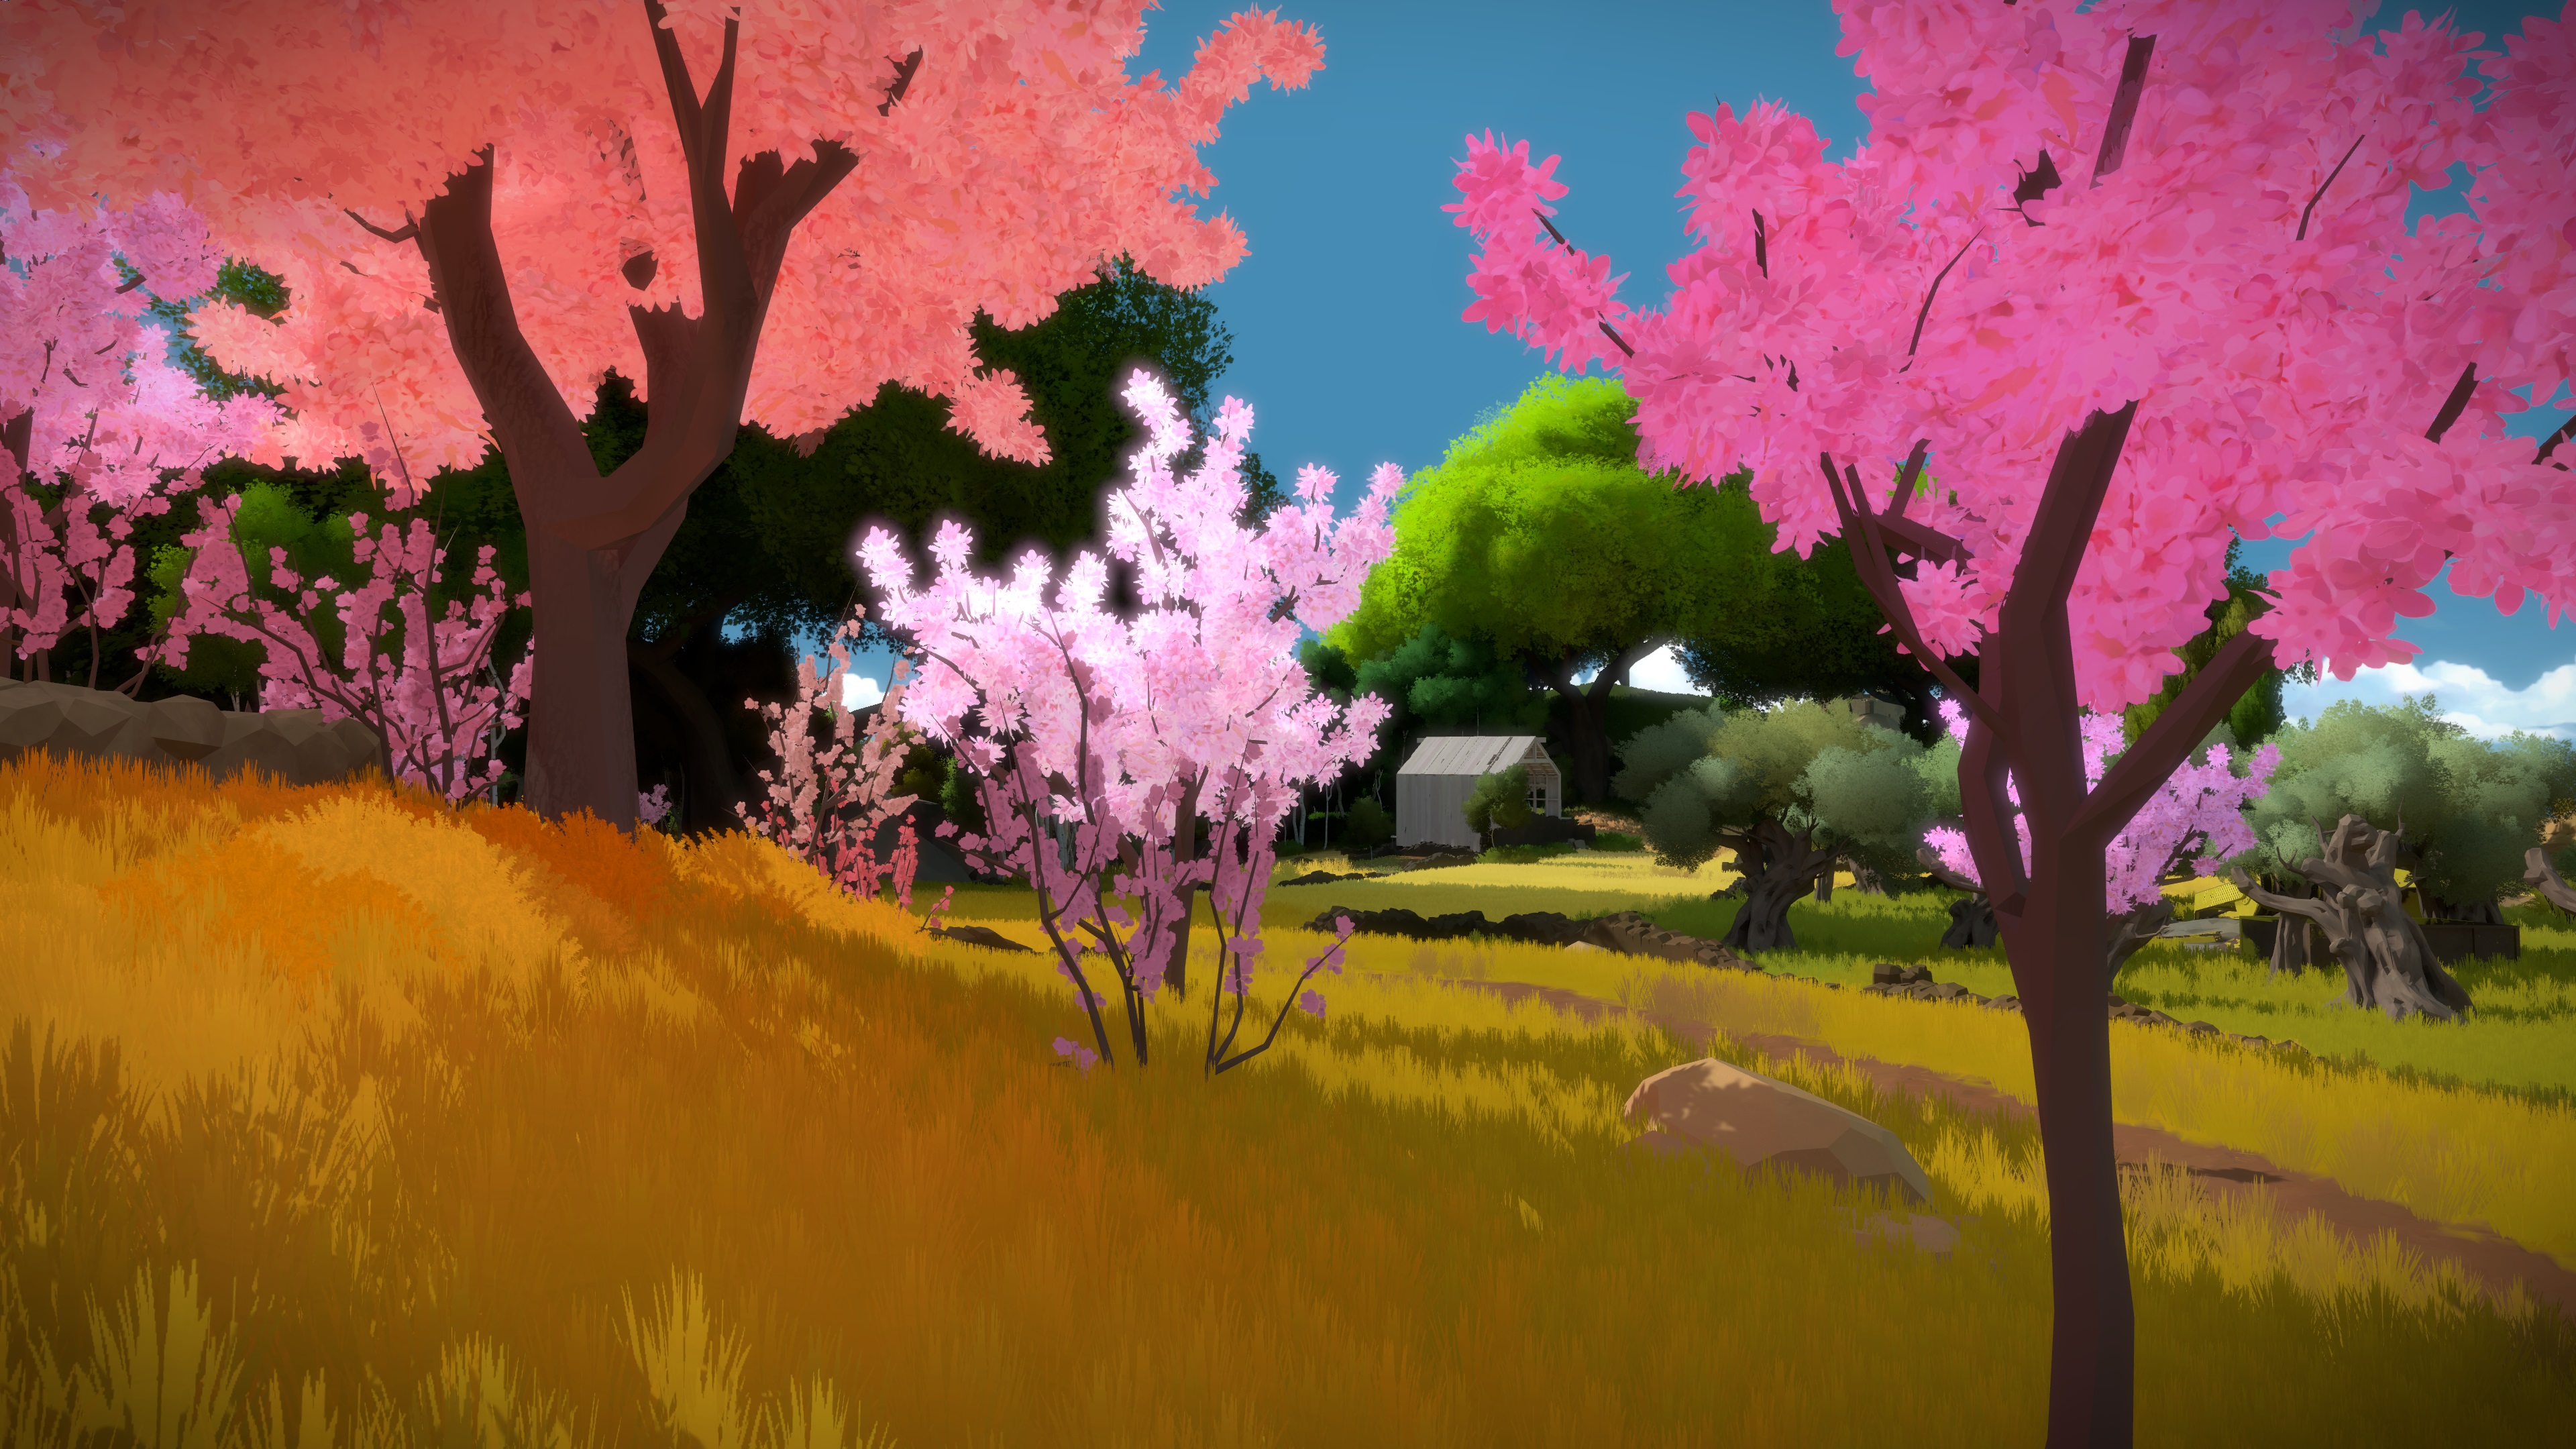 The Witness #11